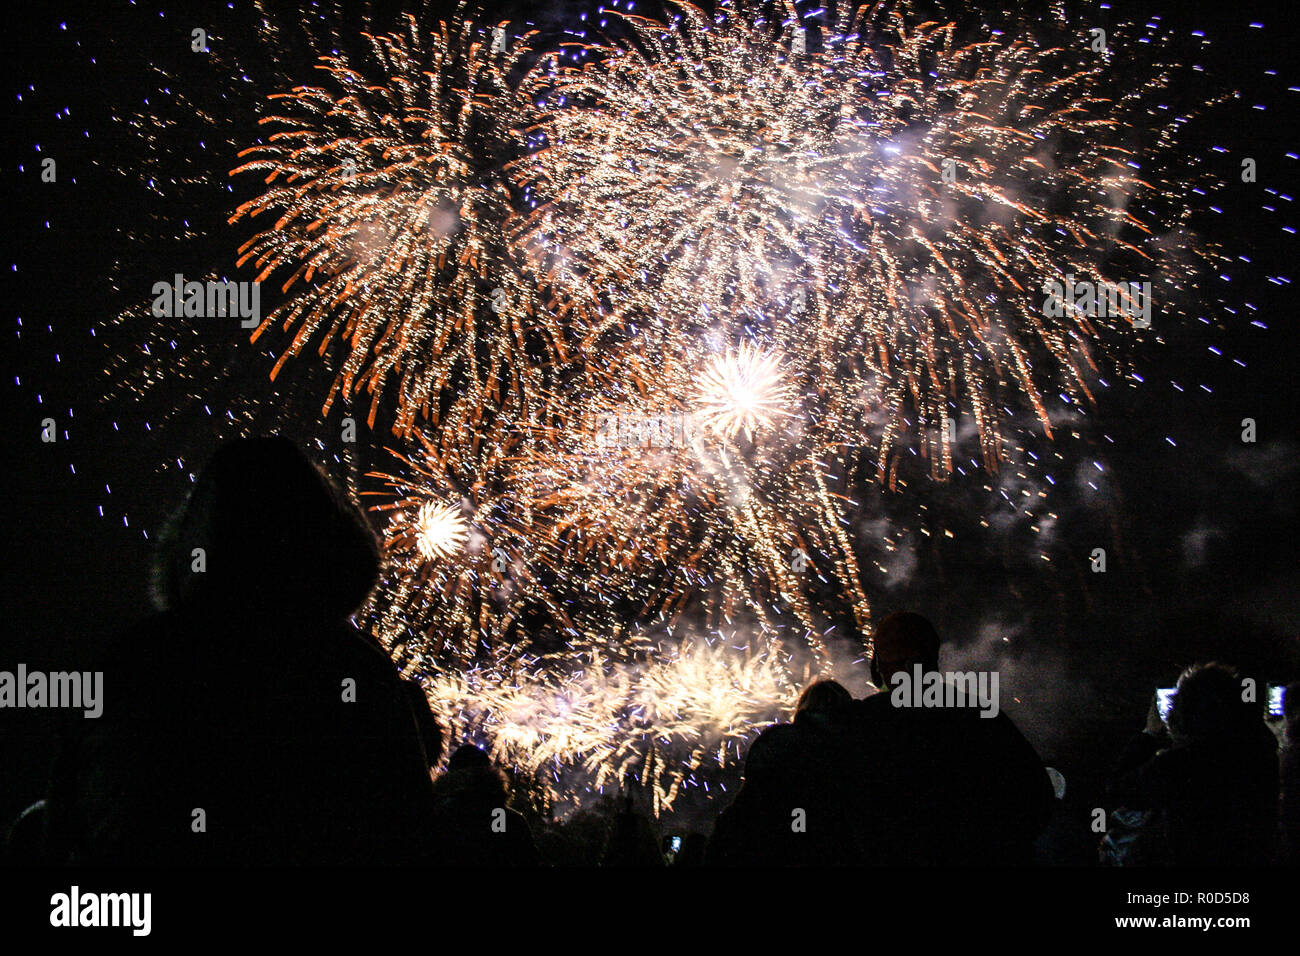 Dudley, West Midlands, UK. 3rd November, 2018. The Bonfire night and fireworks show at the Himley Hall and Park. Dudley, West Midlands - Birmingham area. Guy Fawkes night.  03 November 2018. Gunpowder Plot remembrance. Credit: Tempera Photography Studio/Alamy Live News Stock Photo